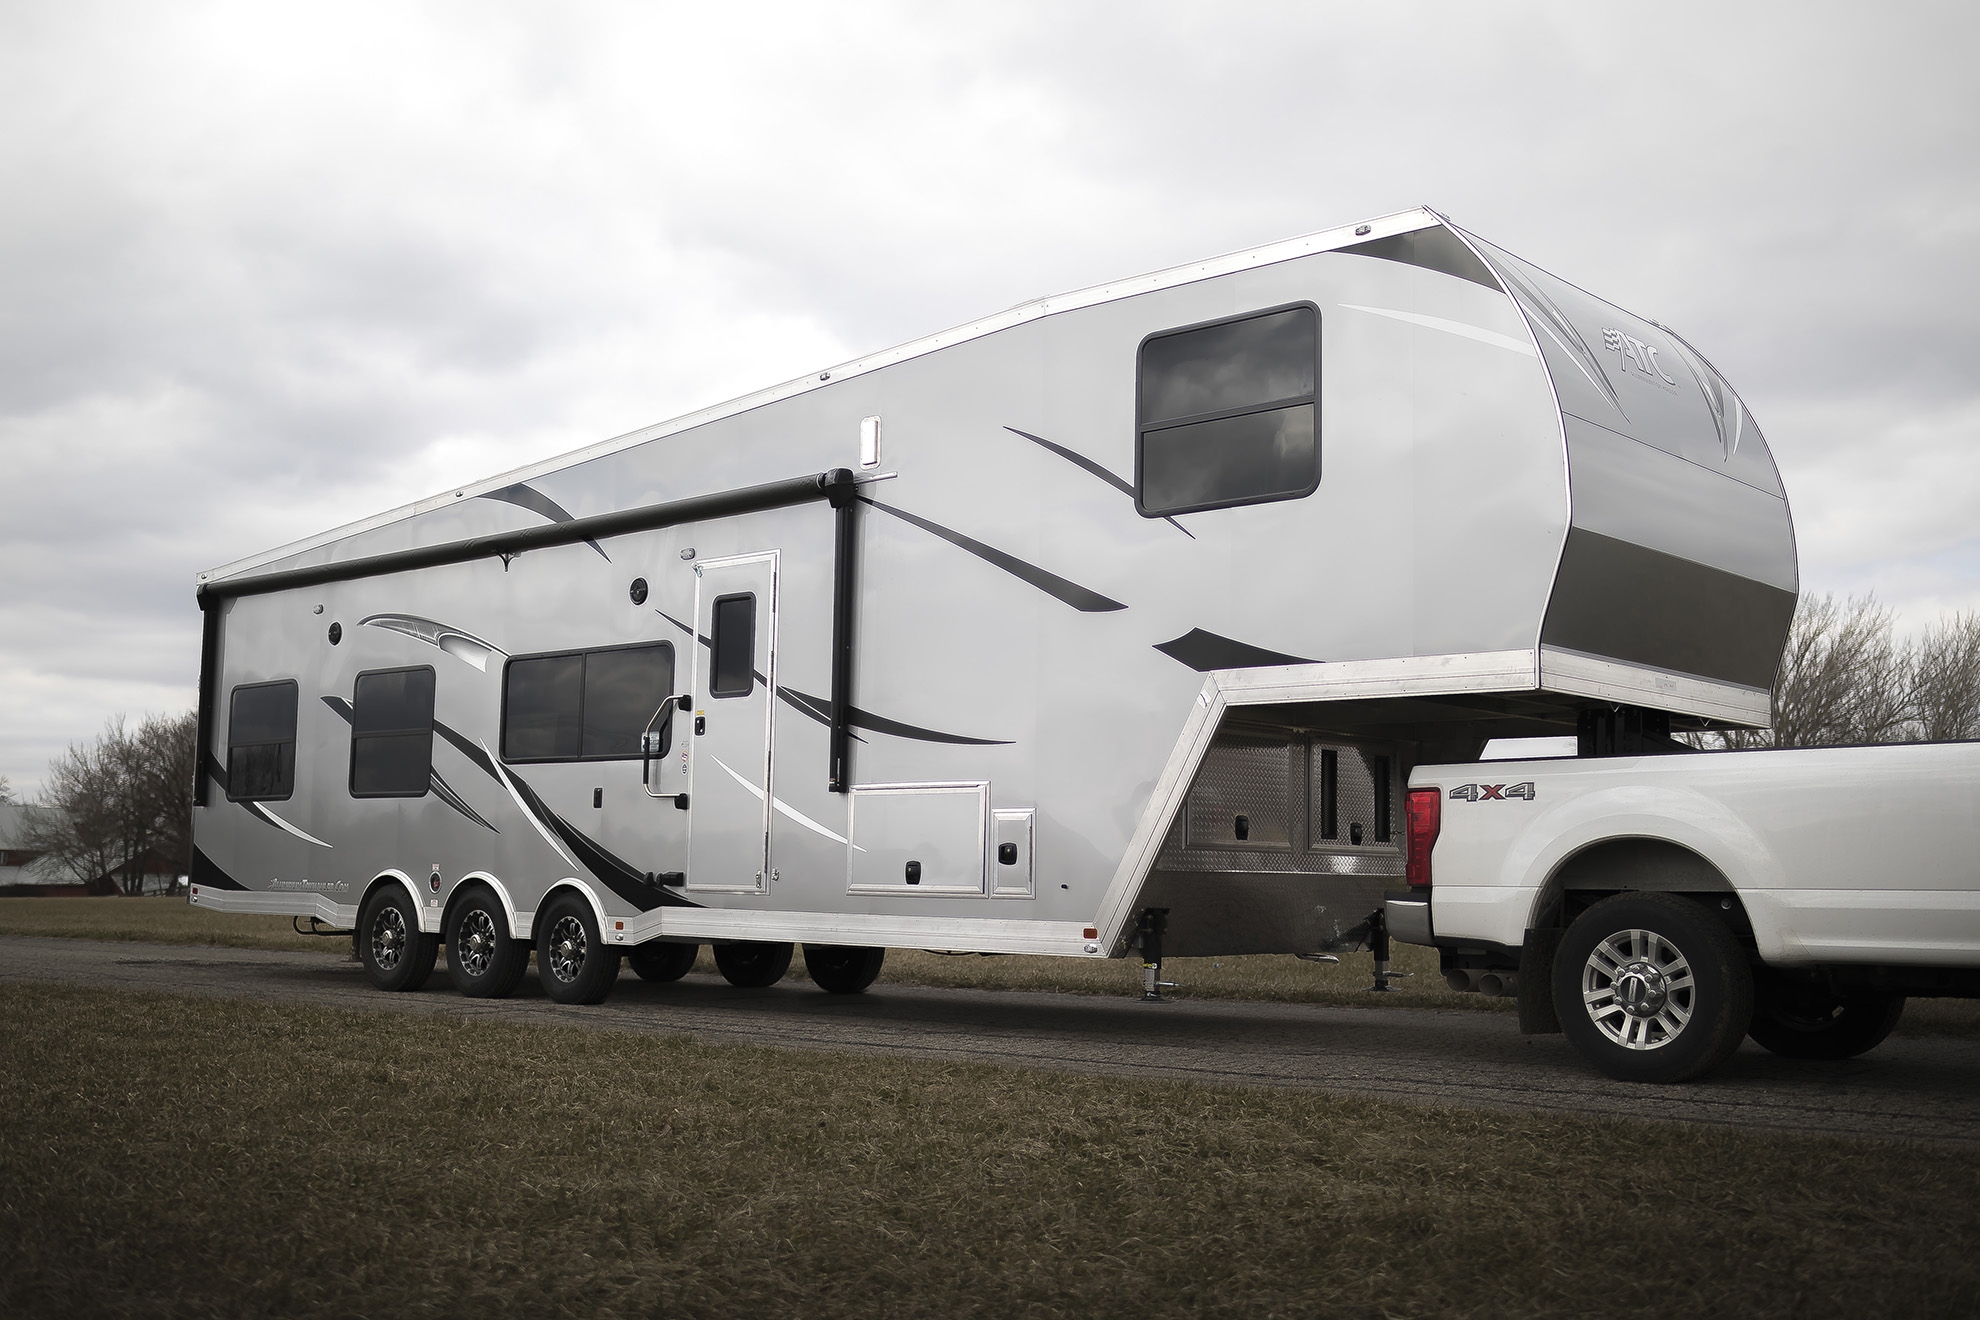 8 Images 30 Foot Fifth Wheel Toy Hauler And View - Alqu Blog Best 5th Wheel Toy Hauler Under 35 Feet